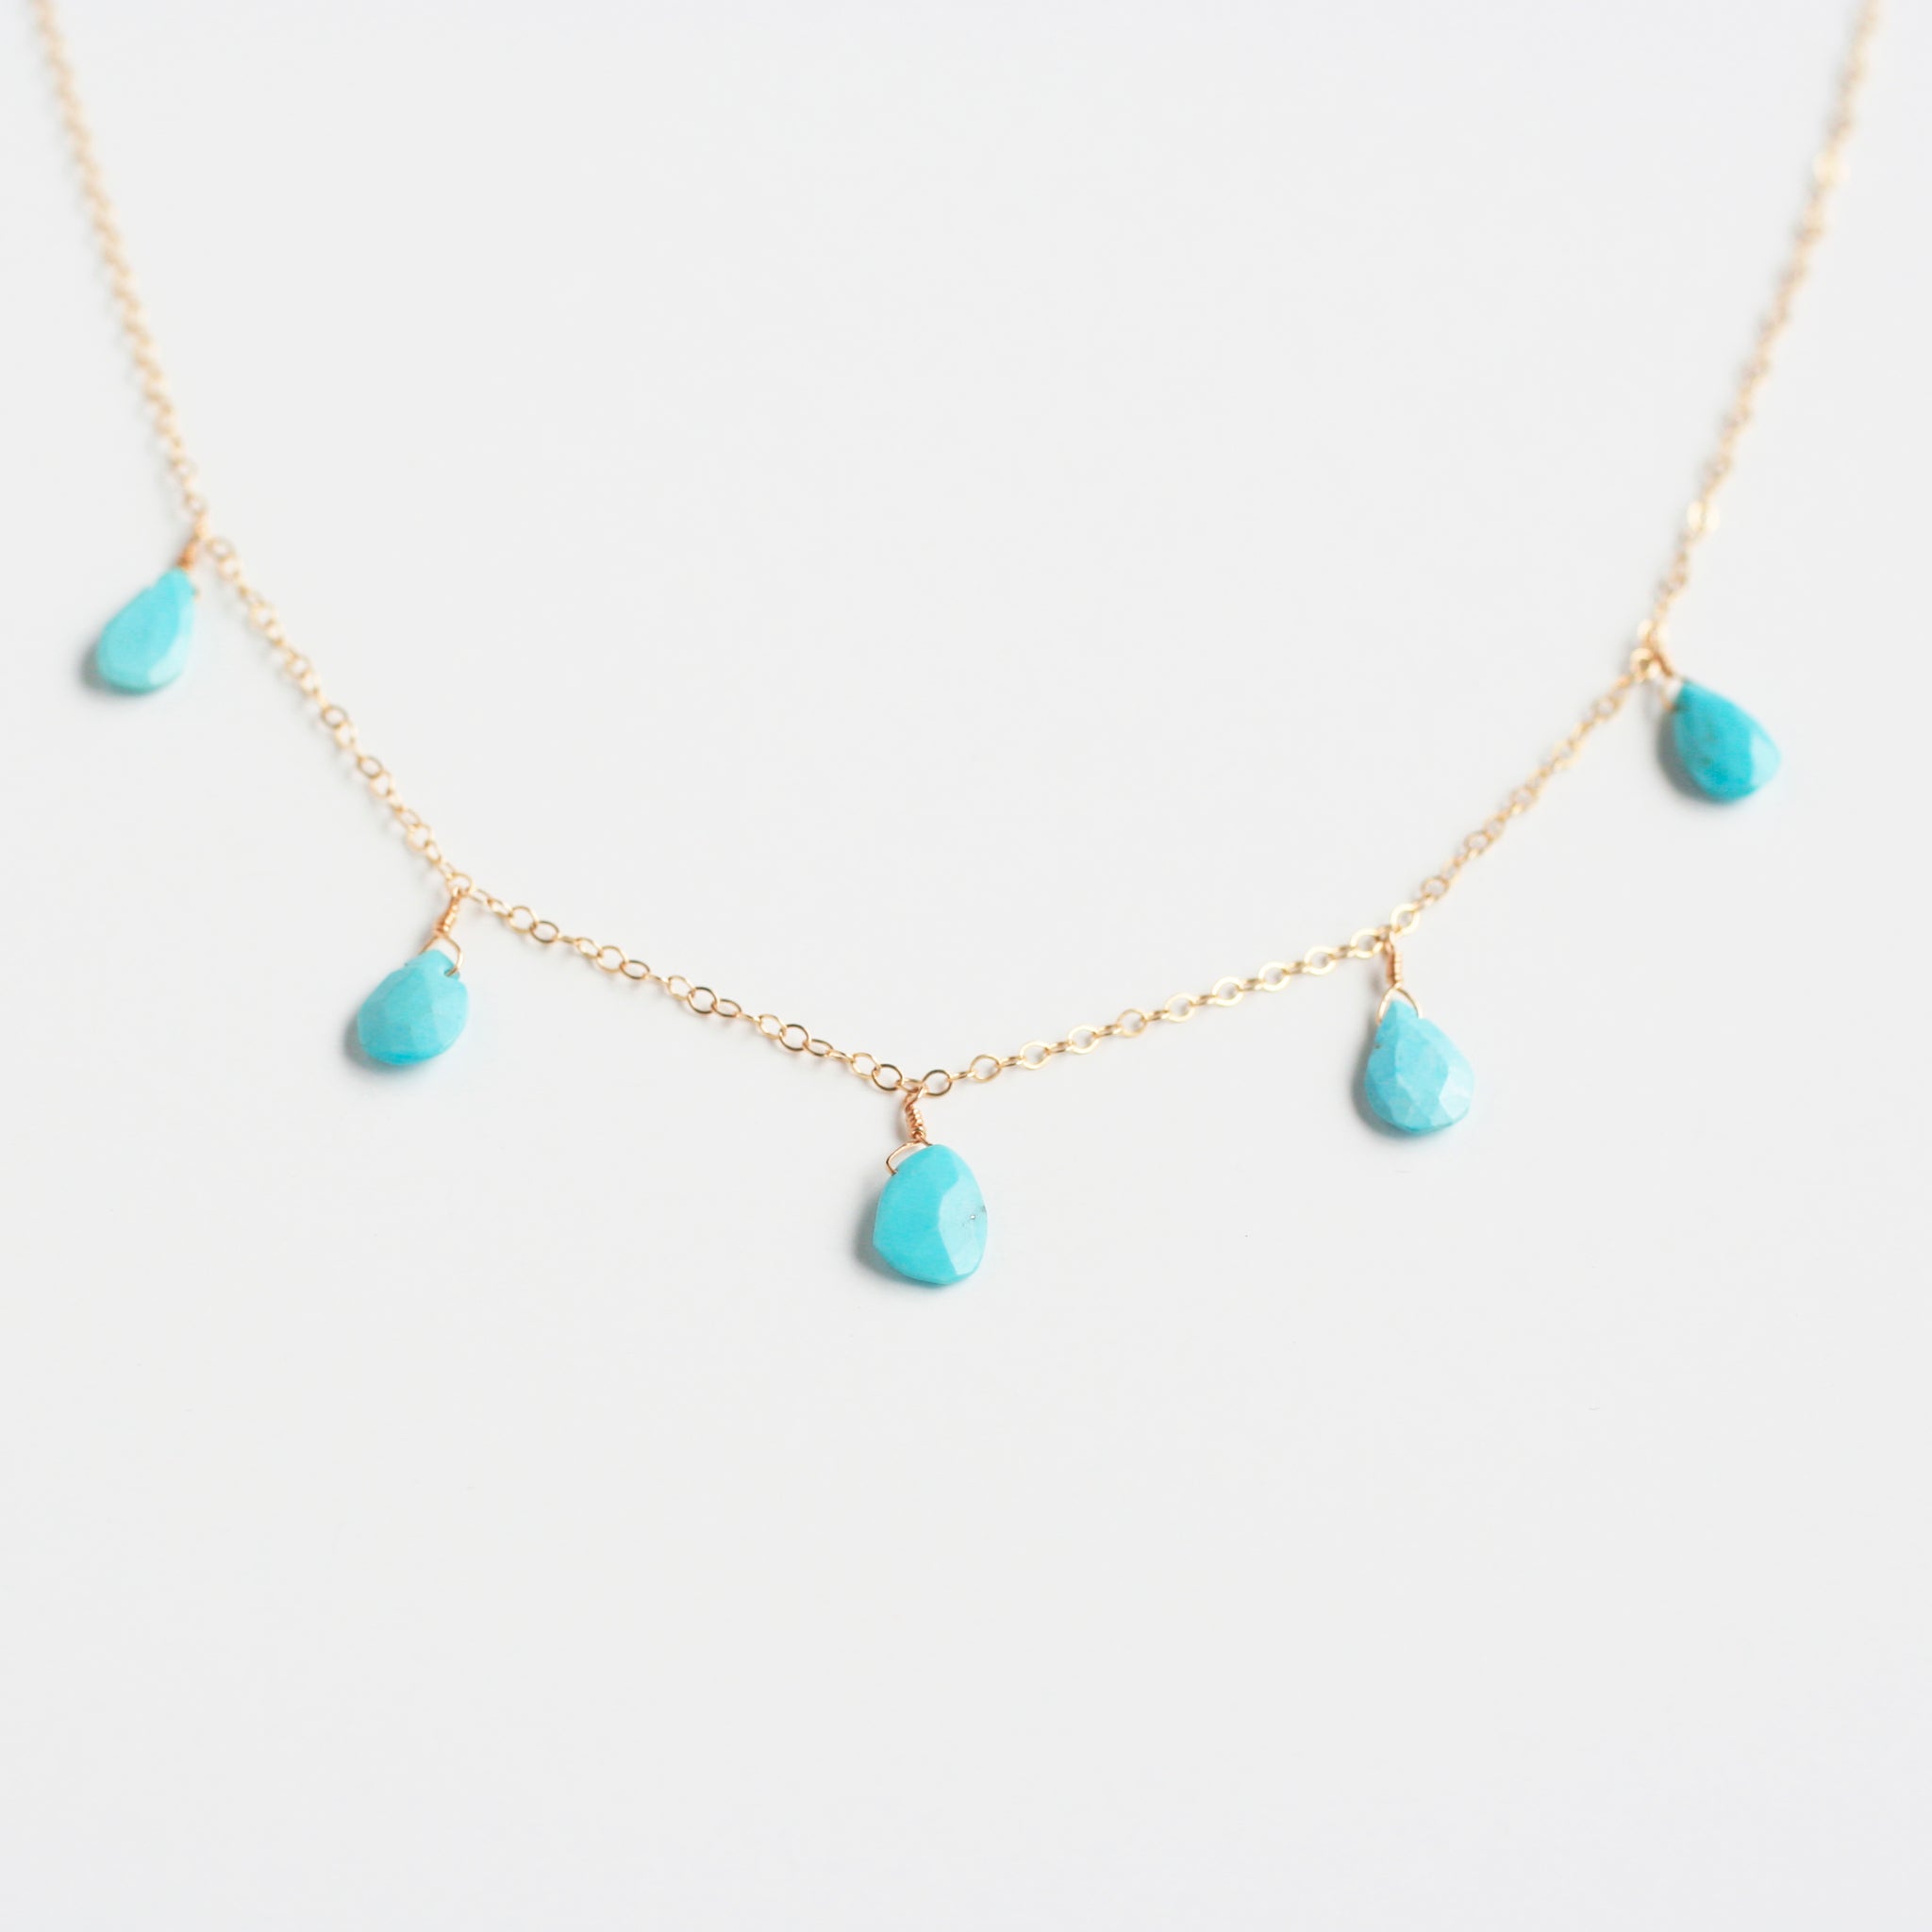 This dangling turquoise necklace is made of real turquoise beads and 14k gold chain.